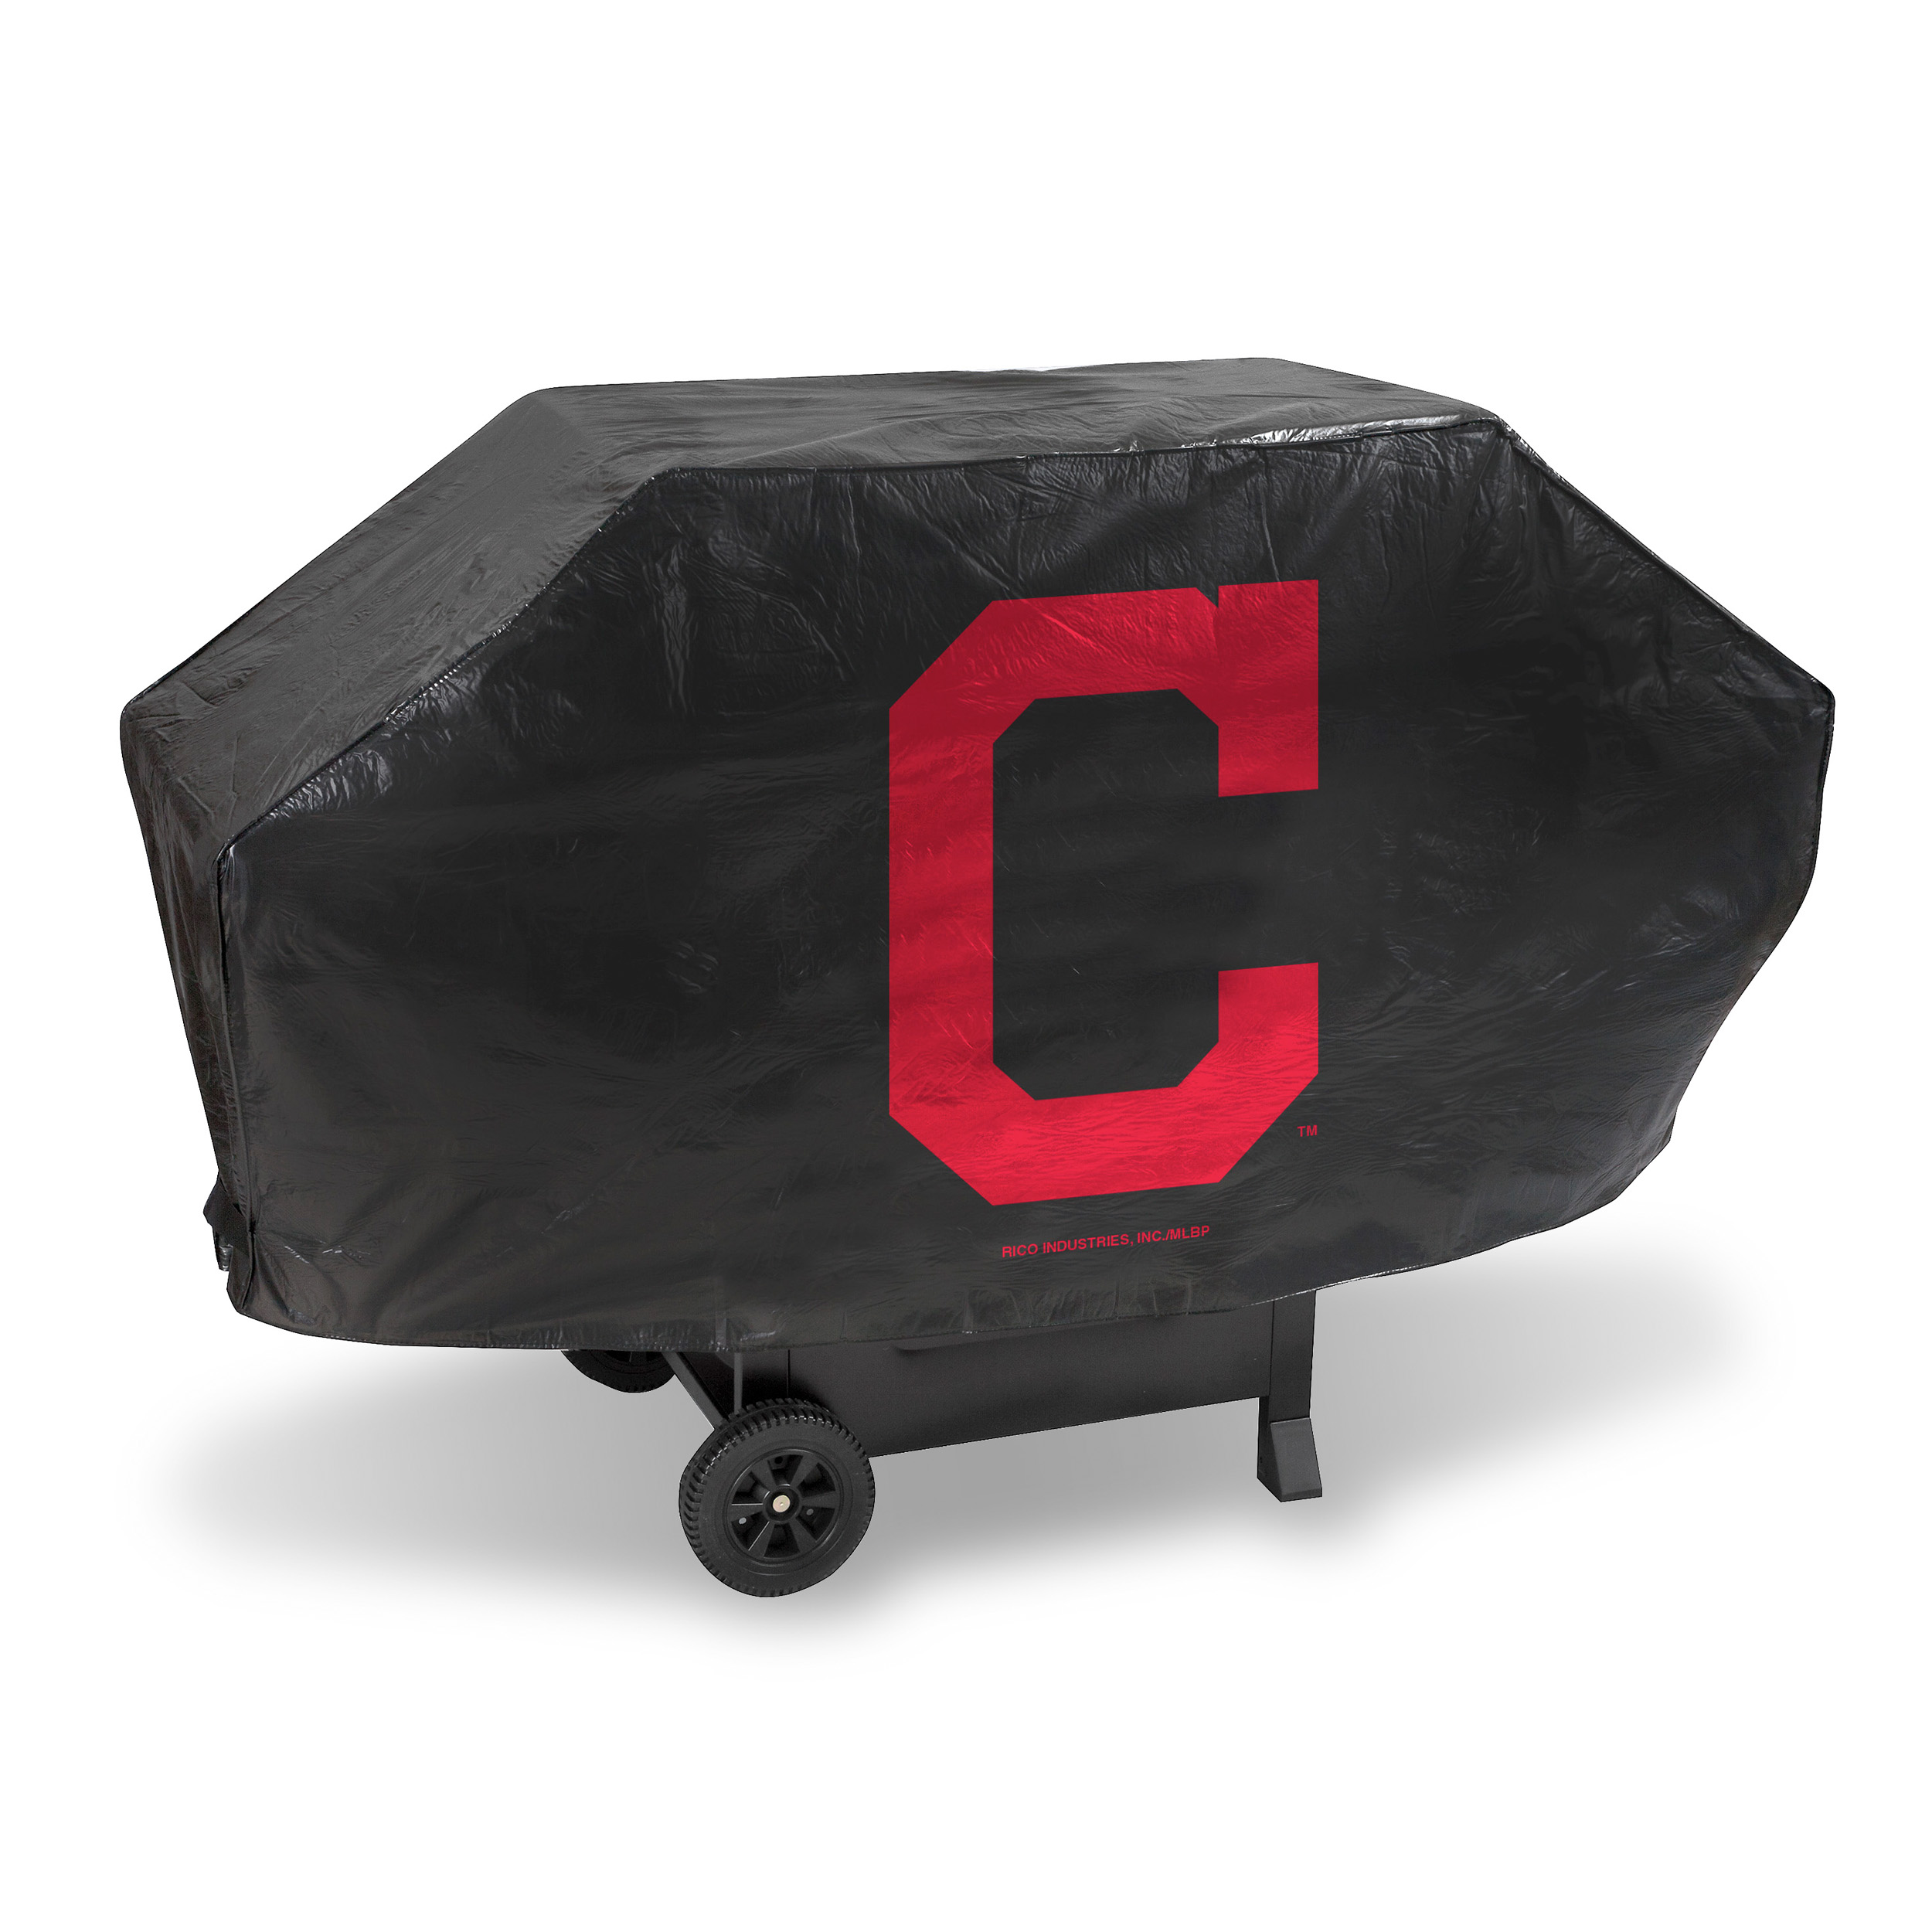 MLB - Rico Industries - Deluxe Grill Cover, Cleveland Indians - image 1 of 2